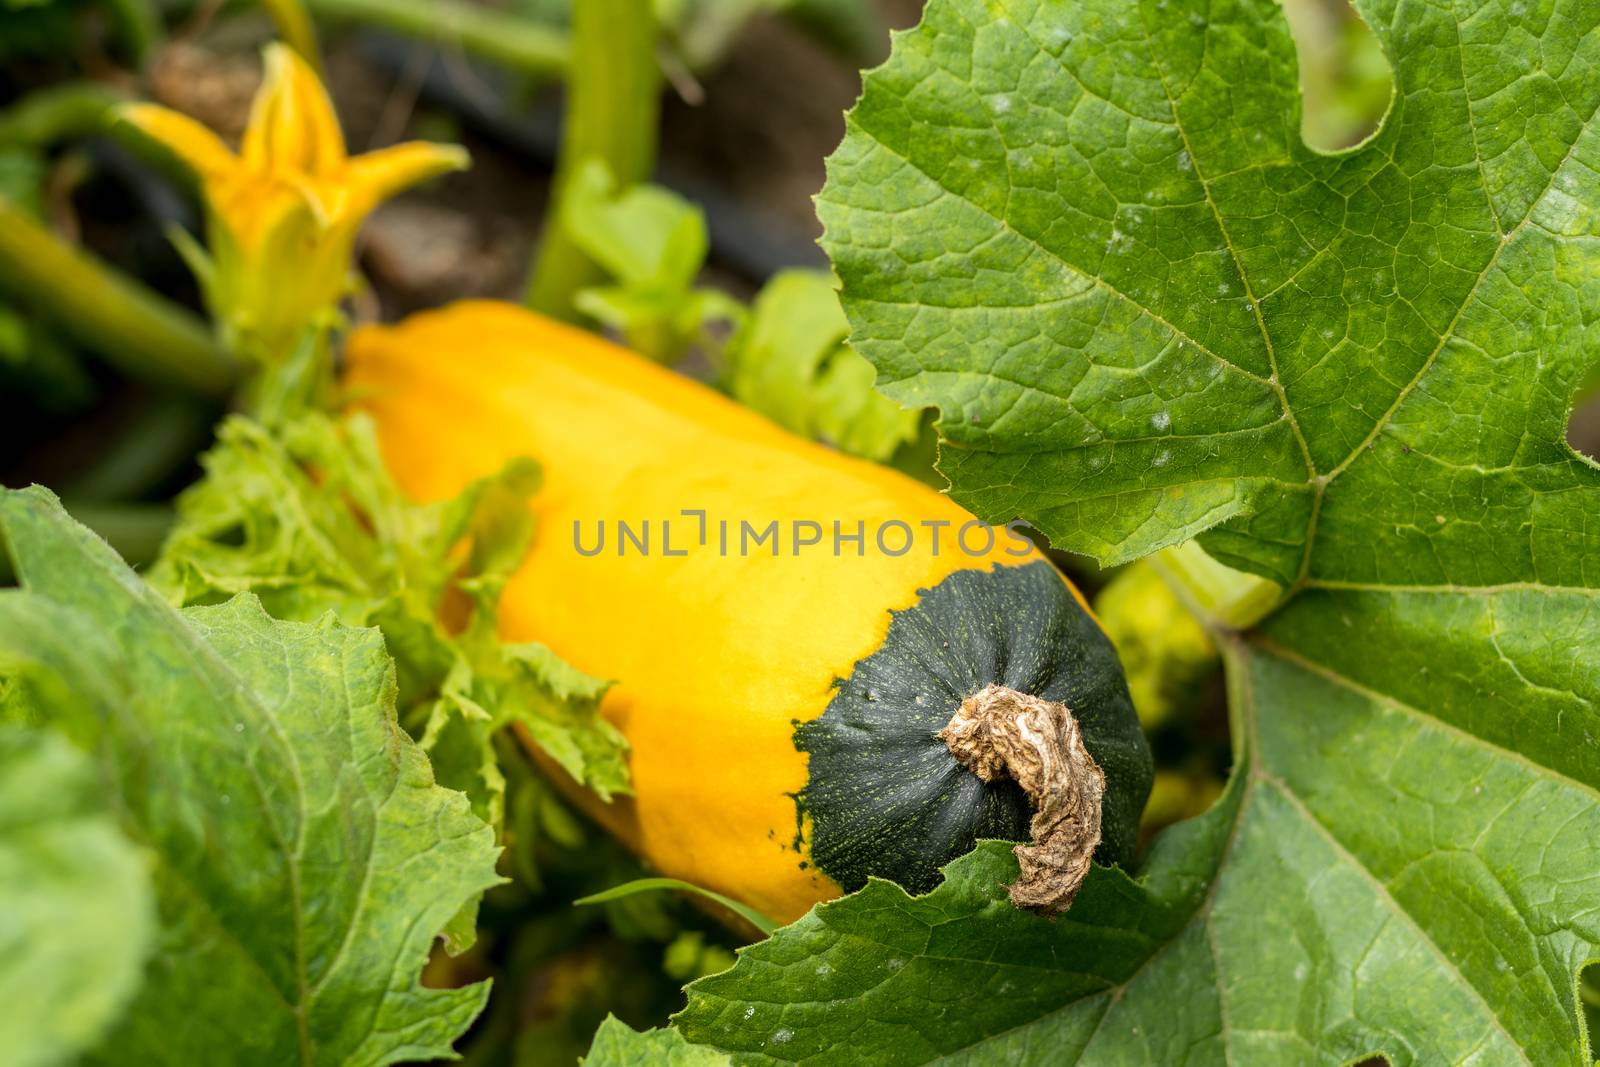 Fresh yellow squash with green top among green leaves in the garden